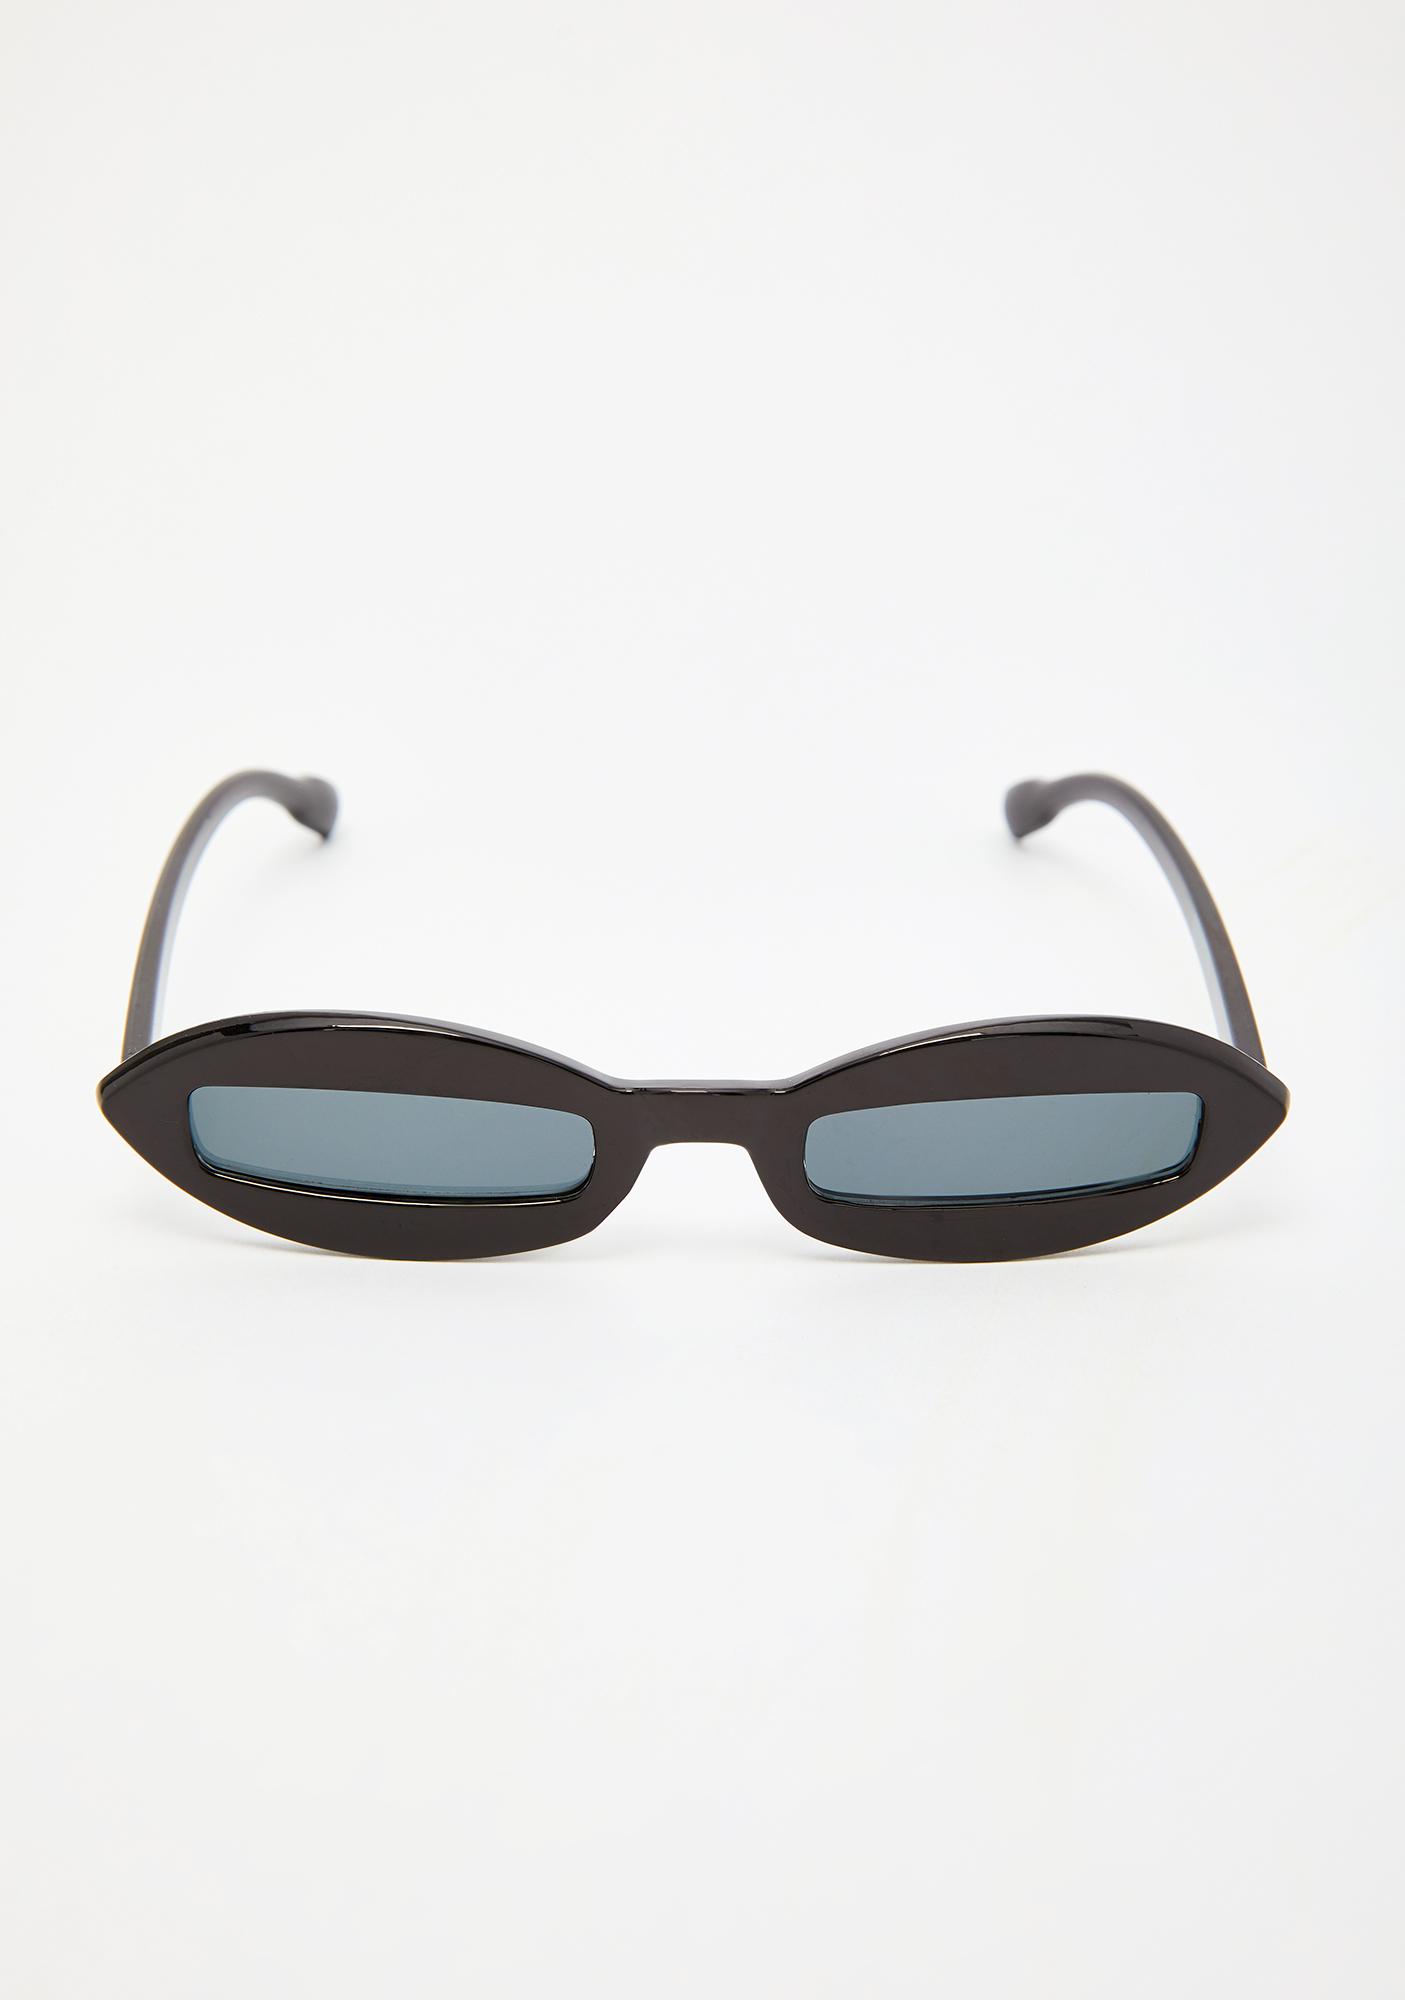 by American Fashion World Black Cat Sunglasses for 18/'/' dolls